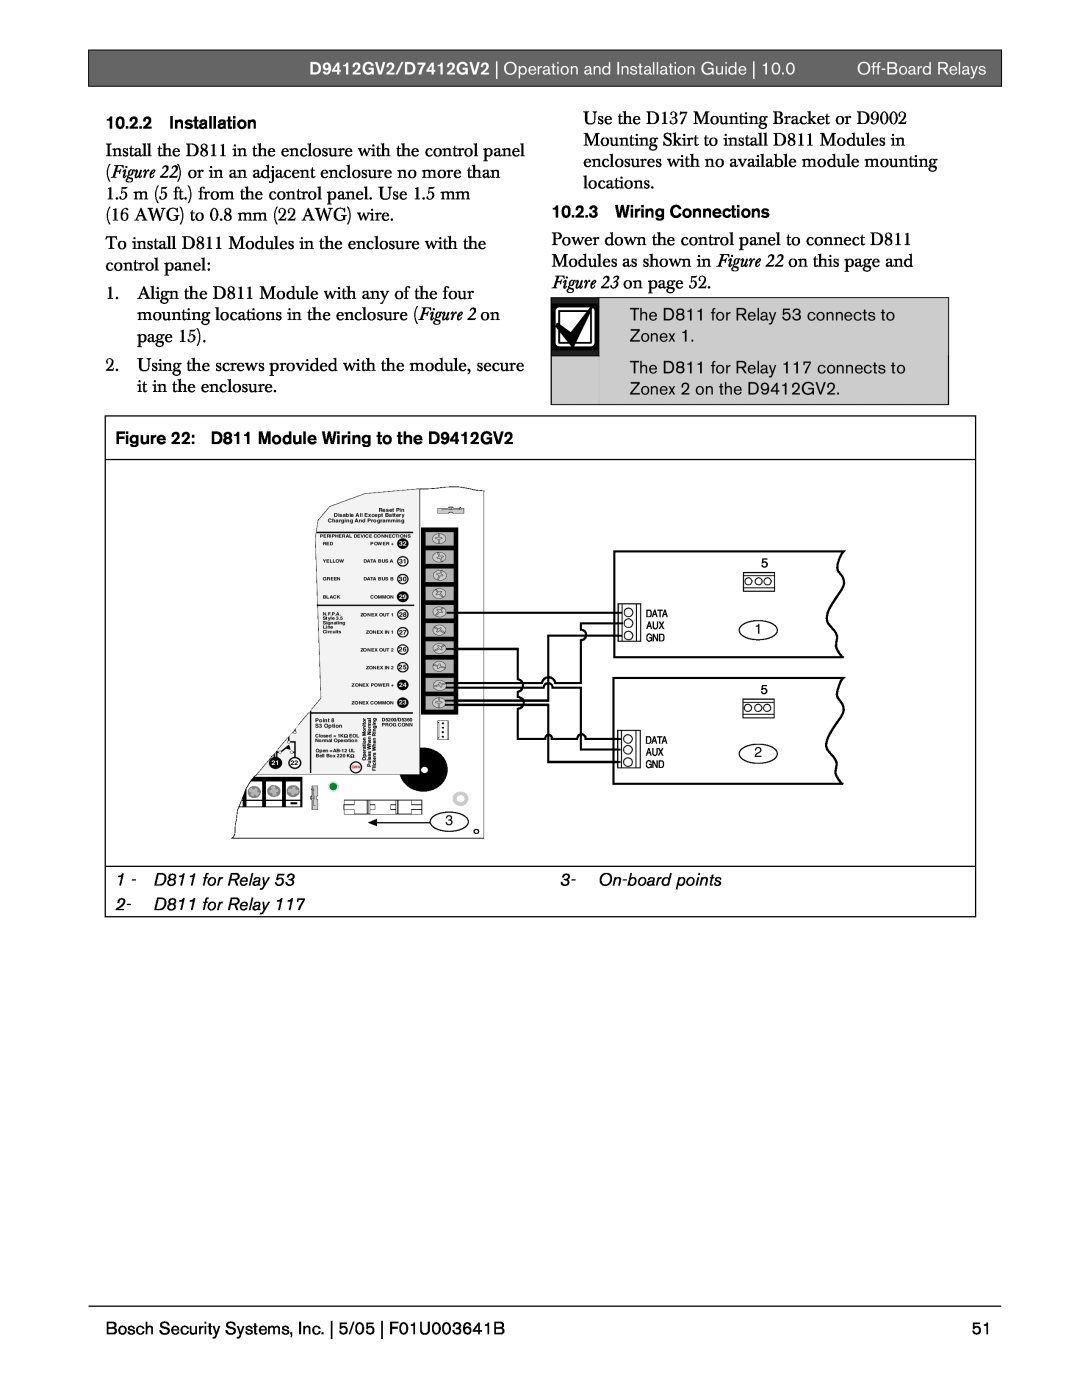 Bosch Appliances manual D811 Module Wiring to the D9412GV2, 1 - D811 for Relay, On-boardpoints, 2- D811 for Relay 